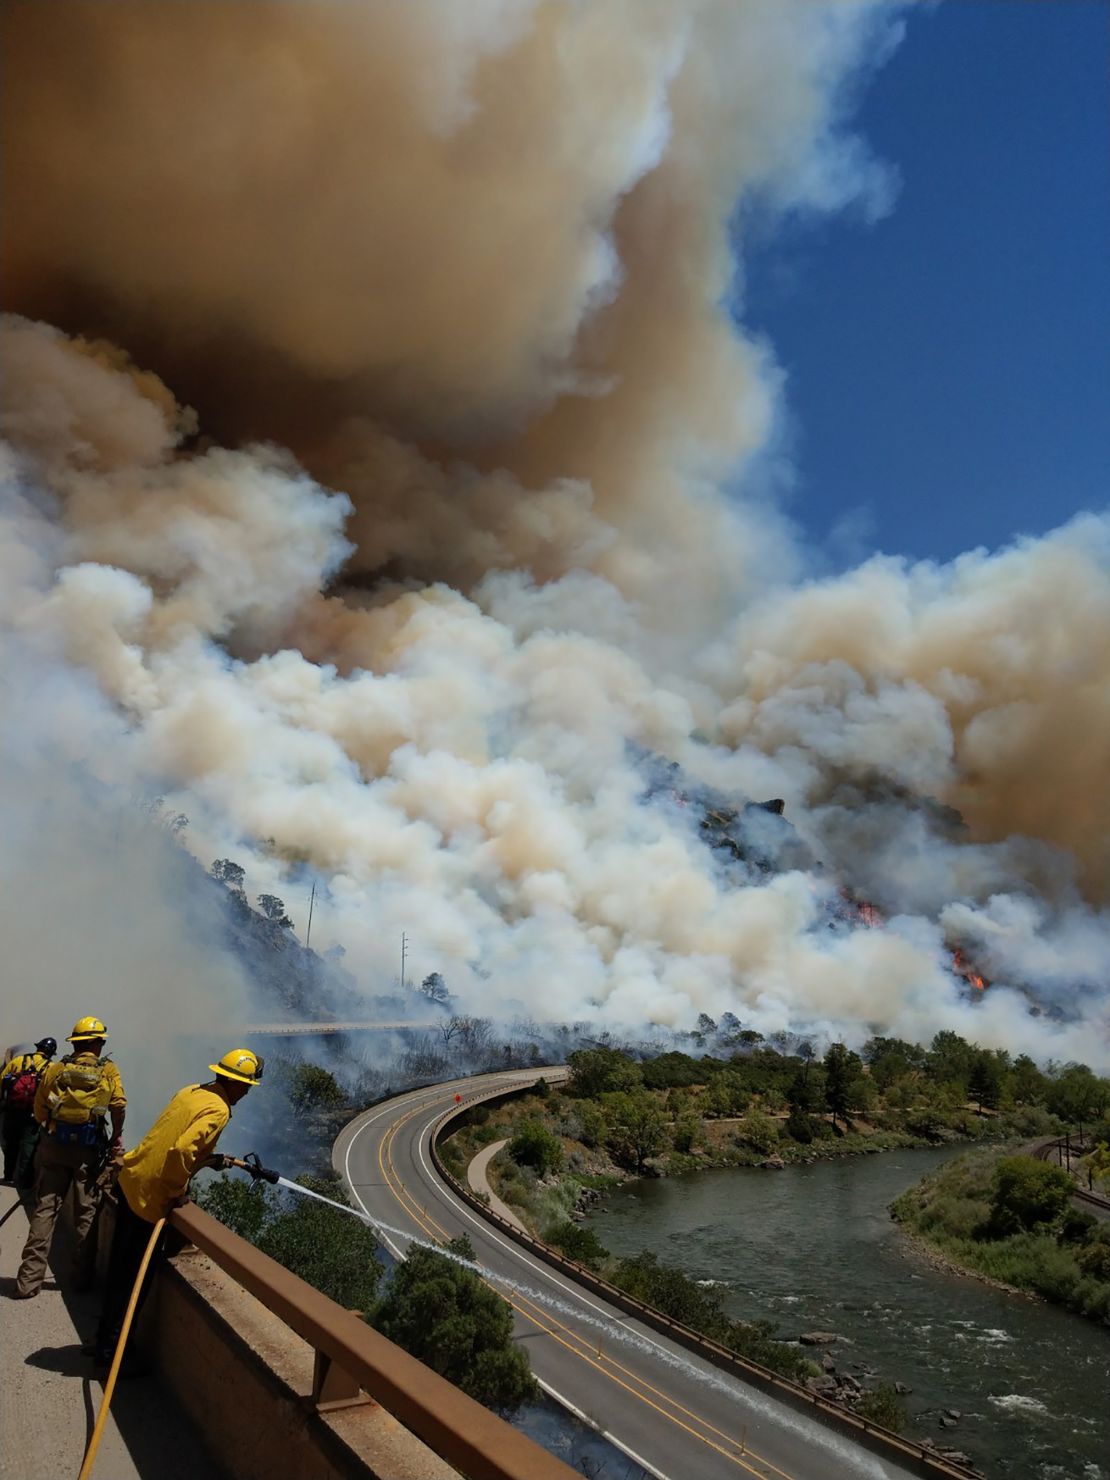 Firefighters battle the Grizzly Creek fire in Colorado on Monday, August 10.